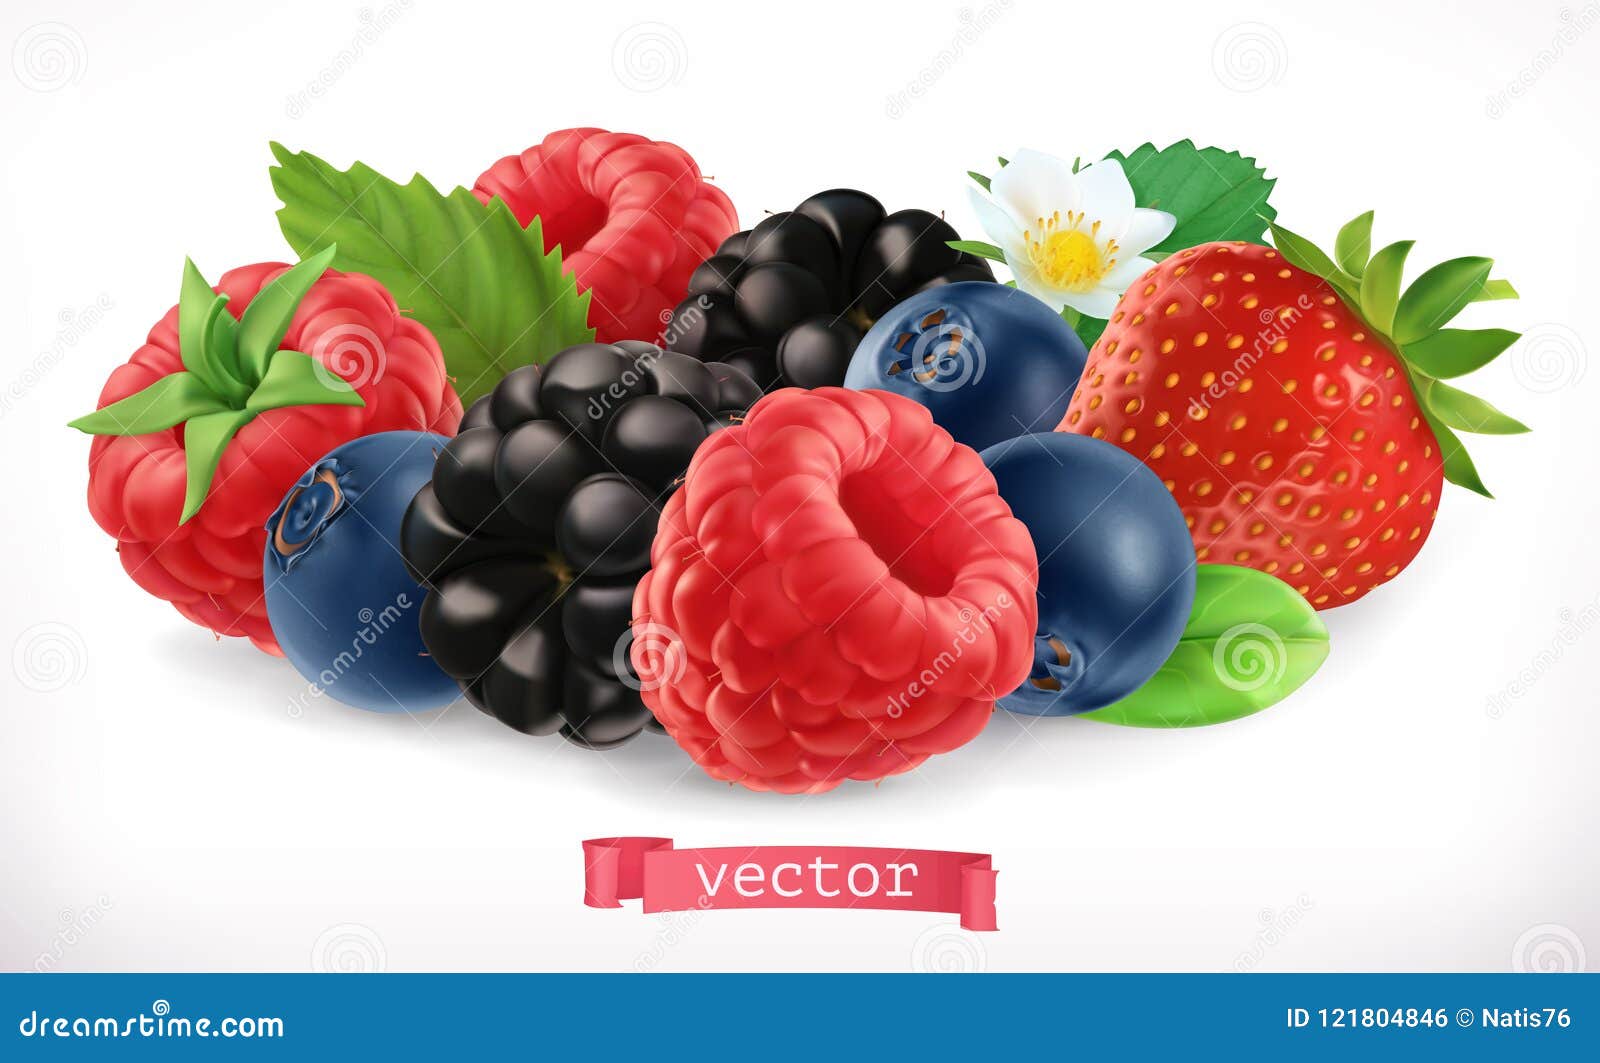 forest fruits and berries. raspberry, strawberry, blackberry and blueberry. 3d  icon